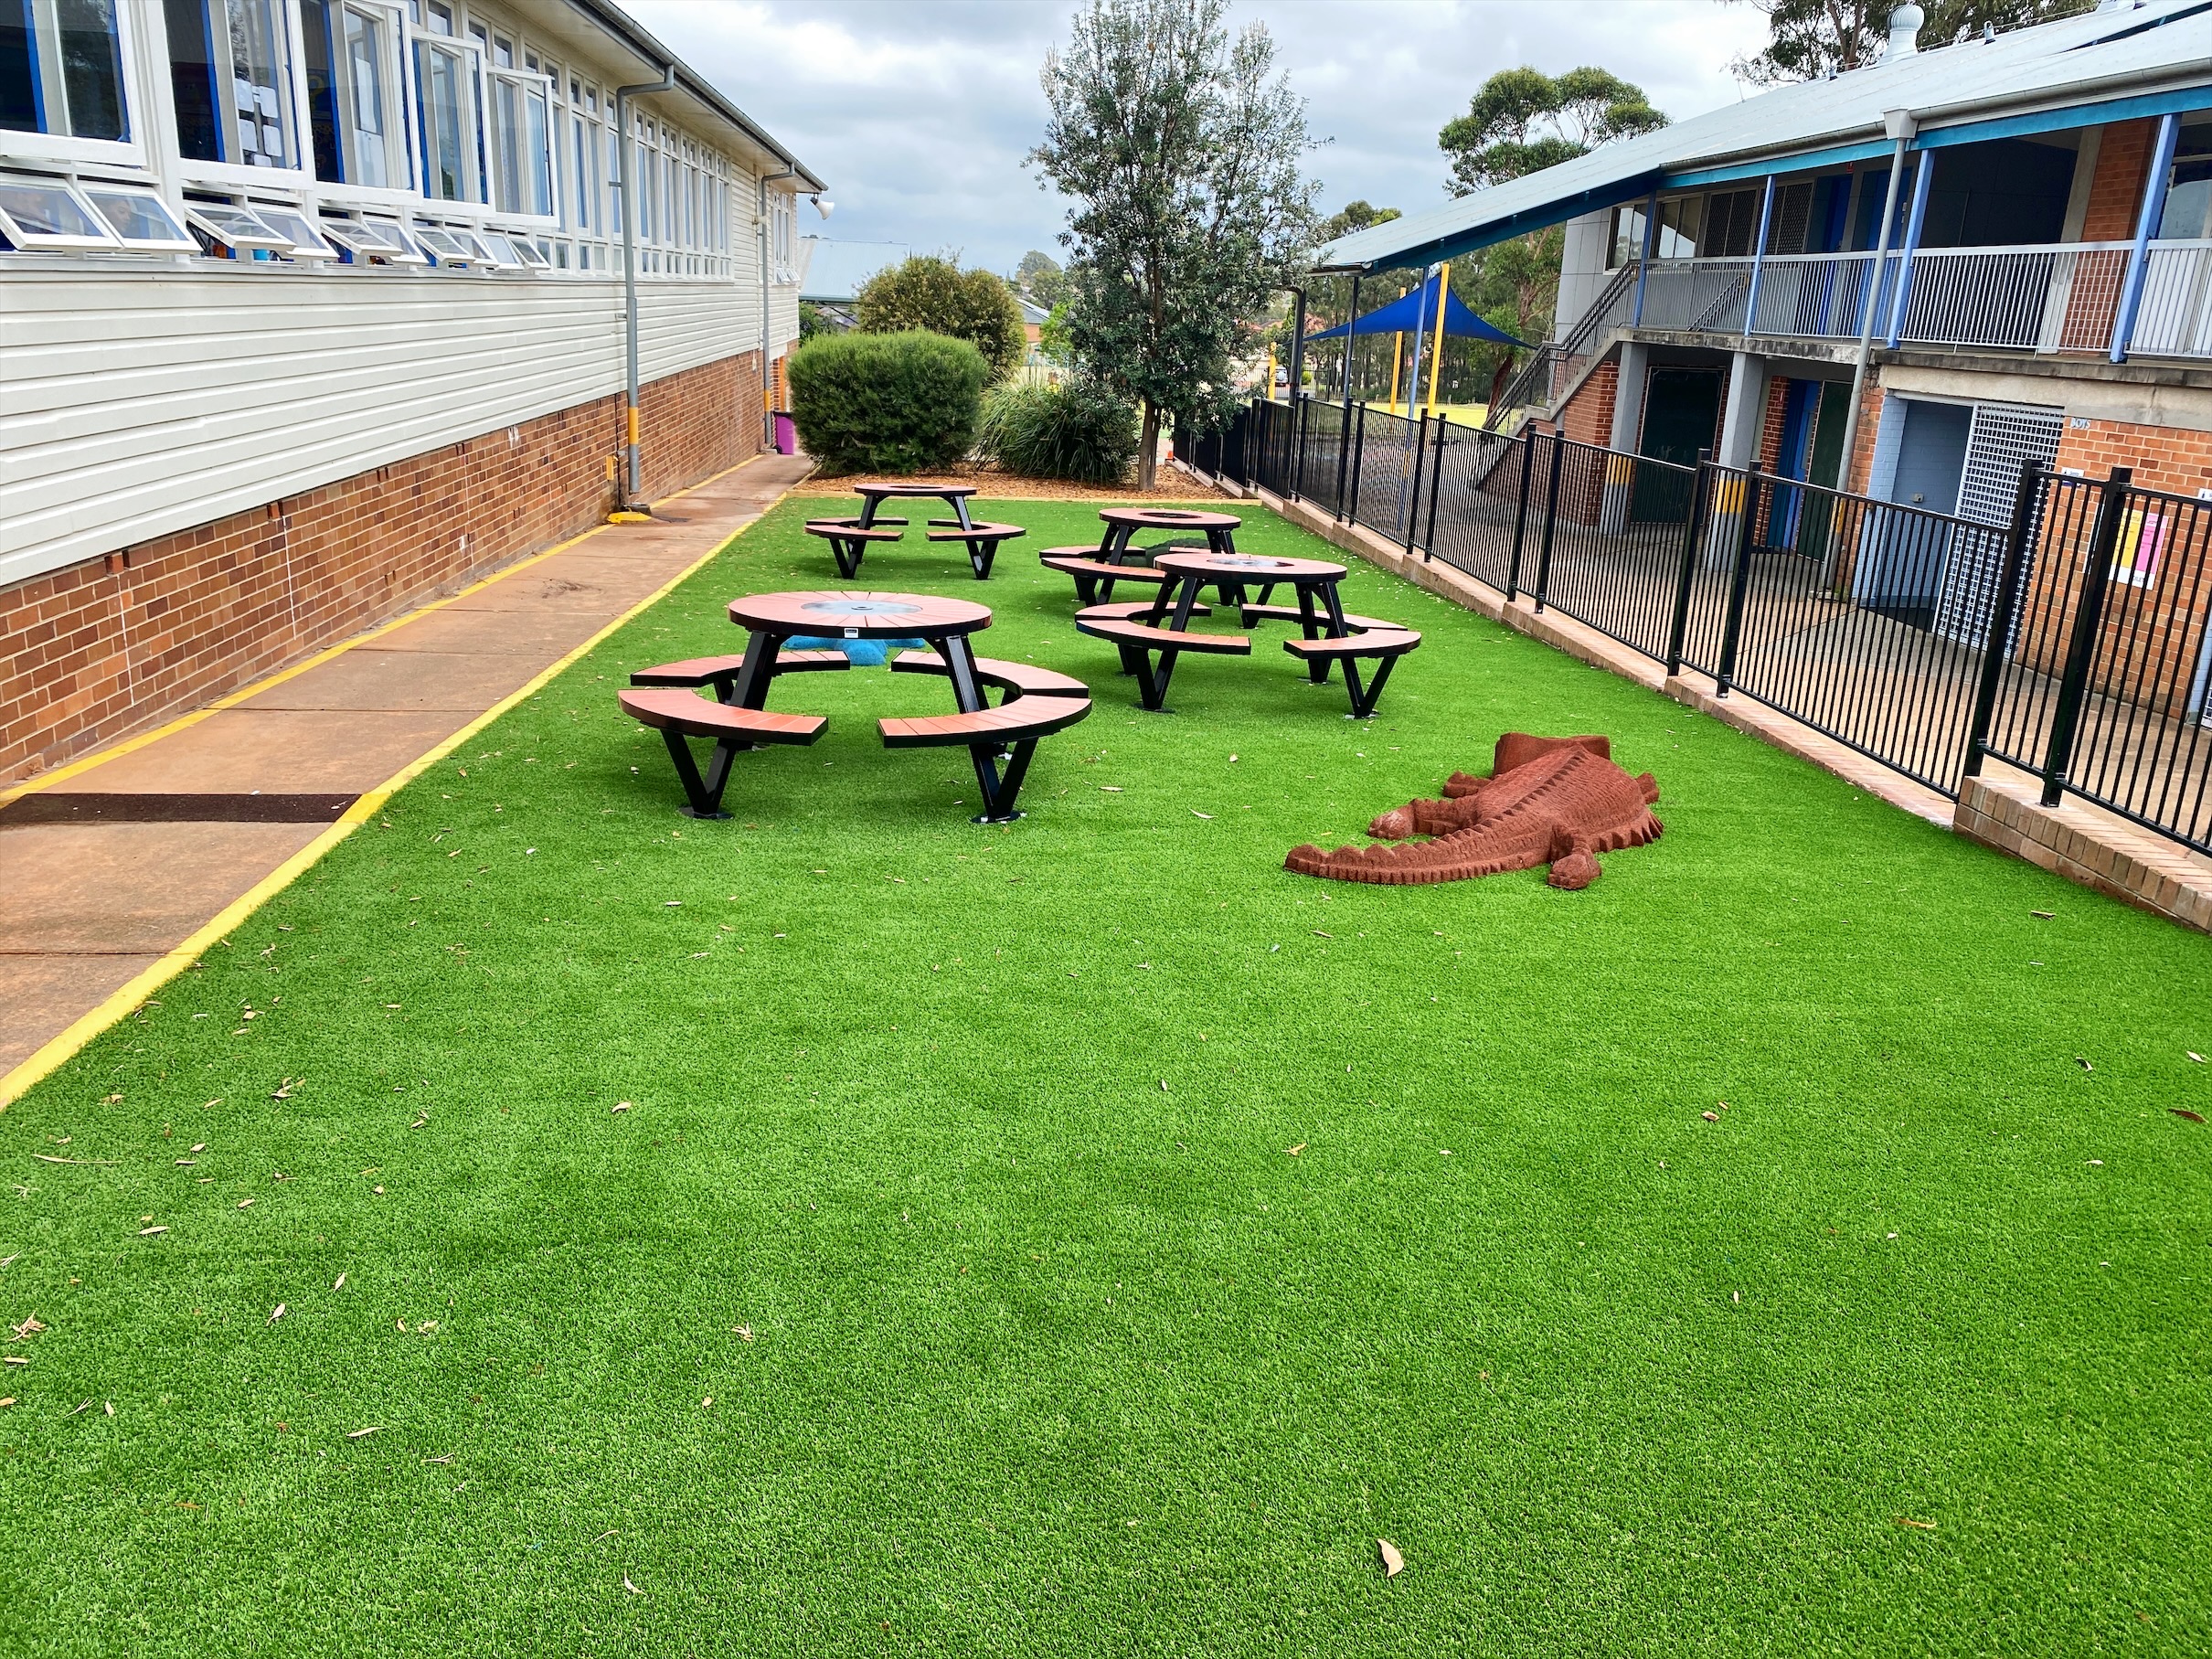 Outdoor settings in a school yard with rubber animal